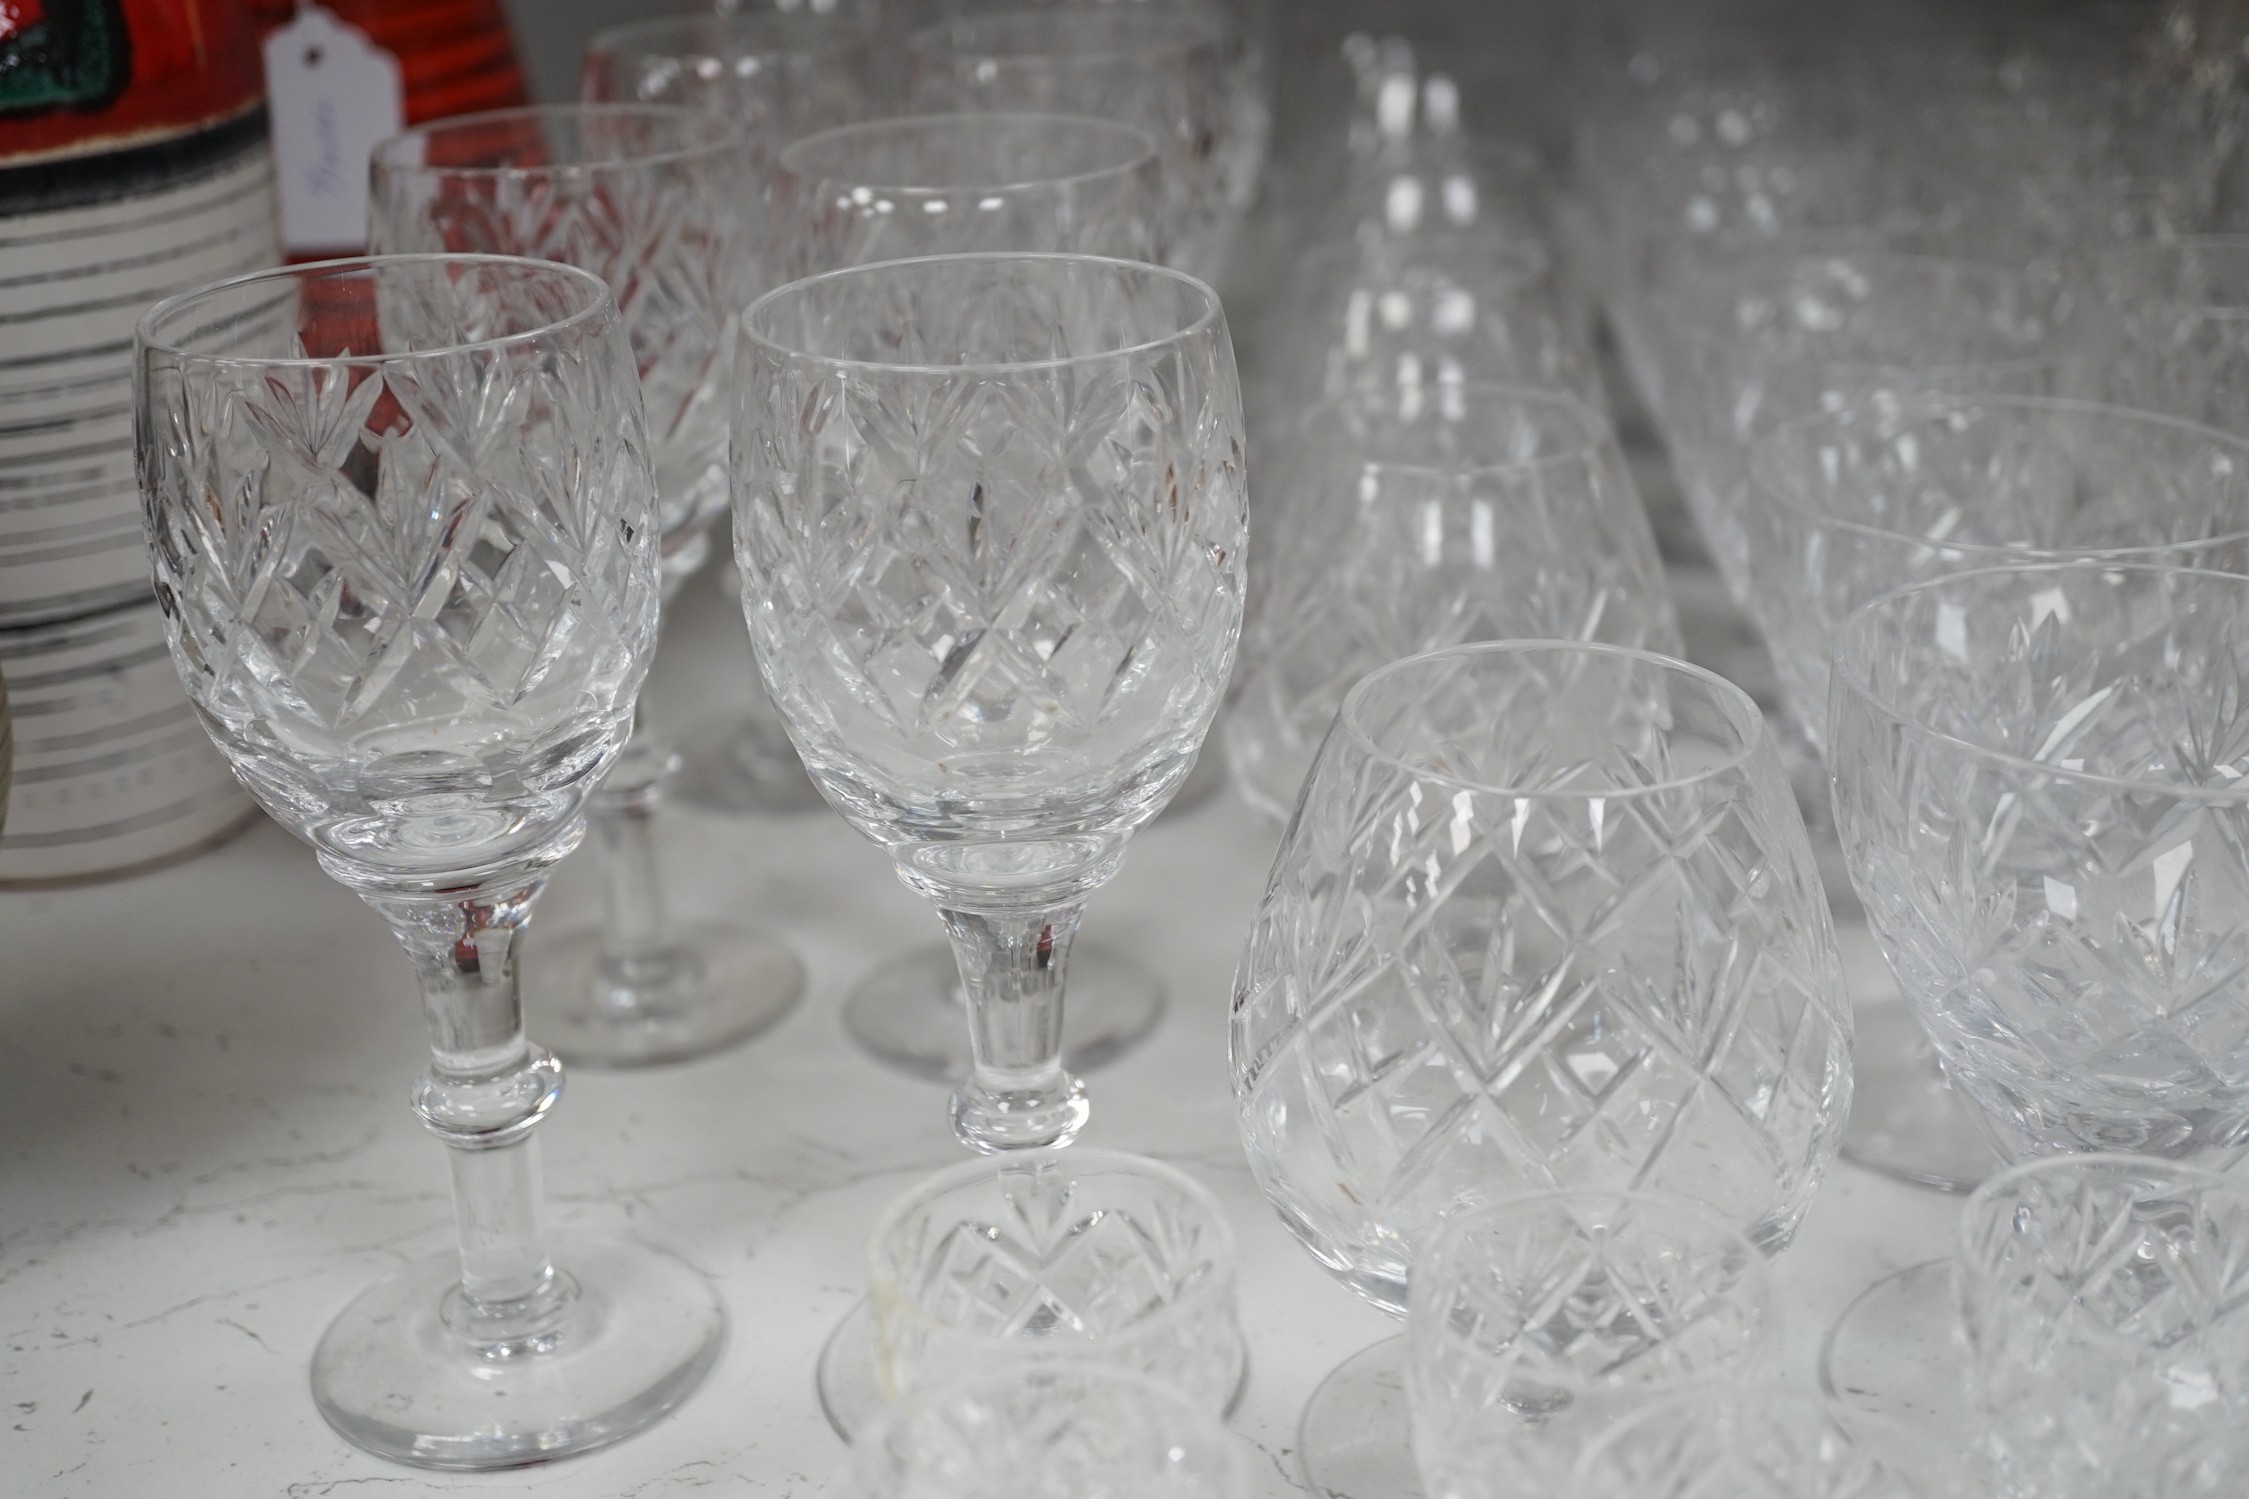 A collection of Royal Doulton glassware, to include: wine glasses, brandy balloons, etc. - Image 8 of 10